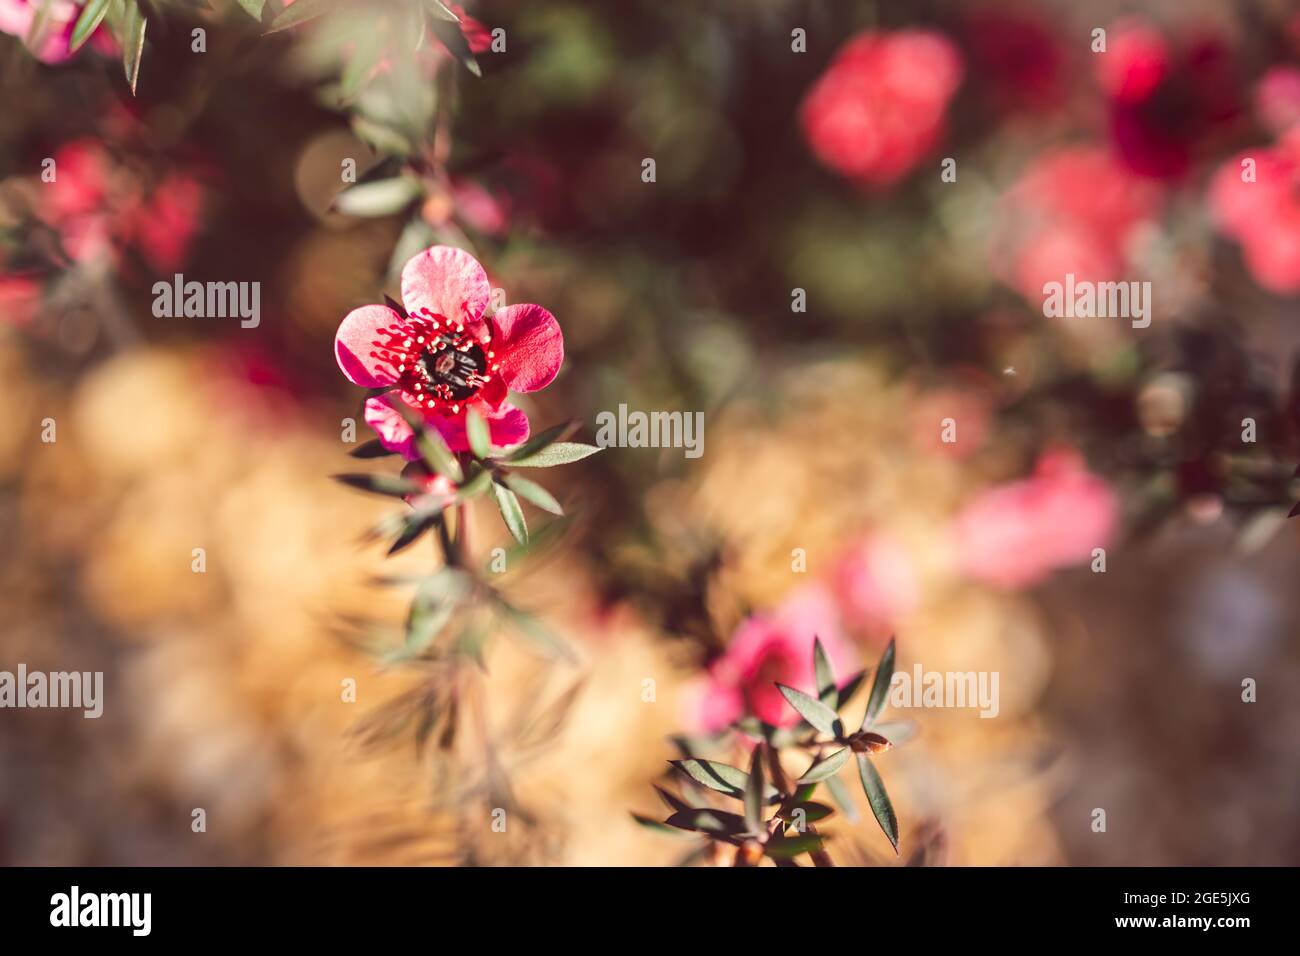 close-up of New Zealand Tea Bush plant with dark leaves and red flowers shot at shallow depth of field Stock Photo